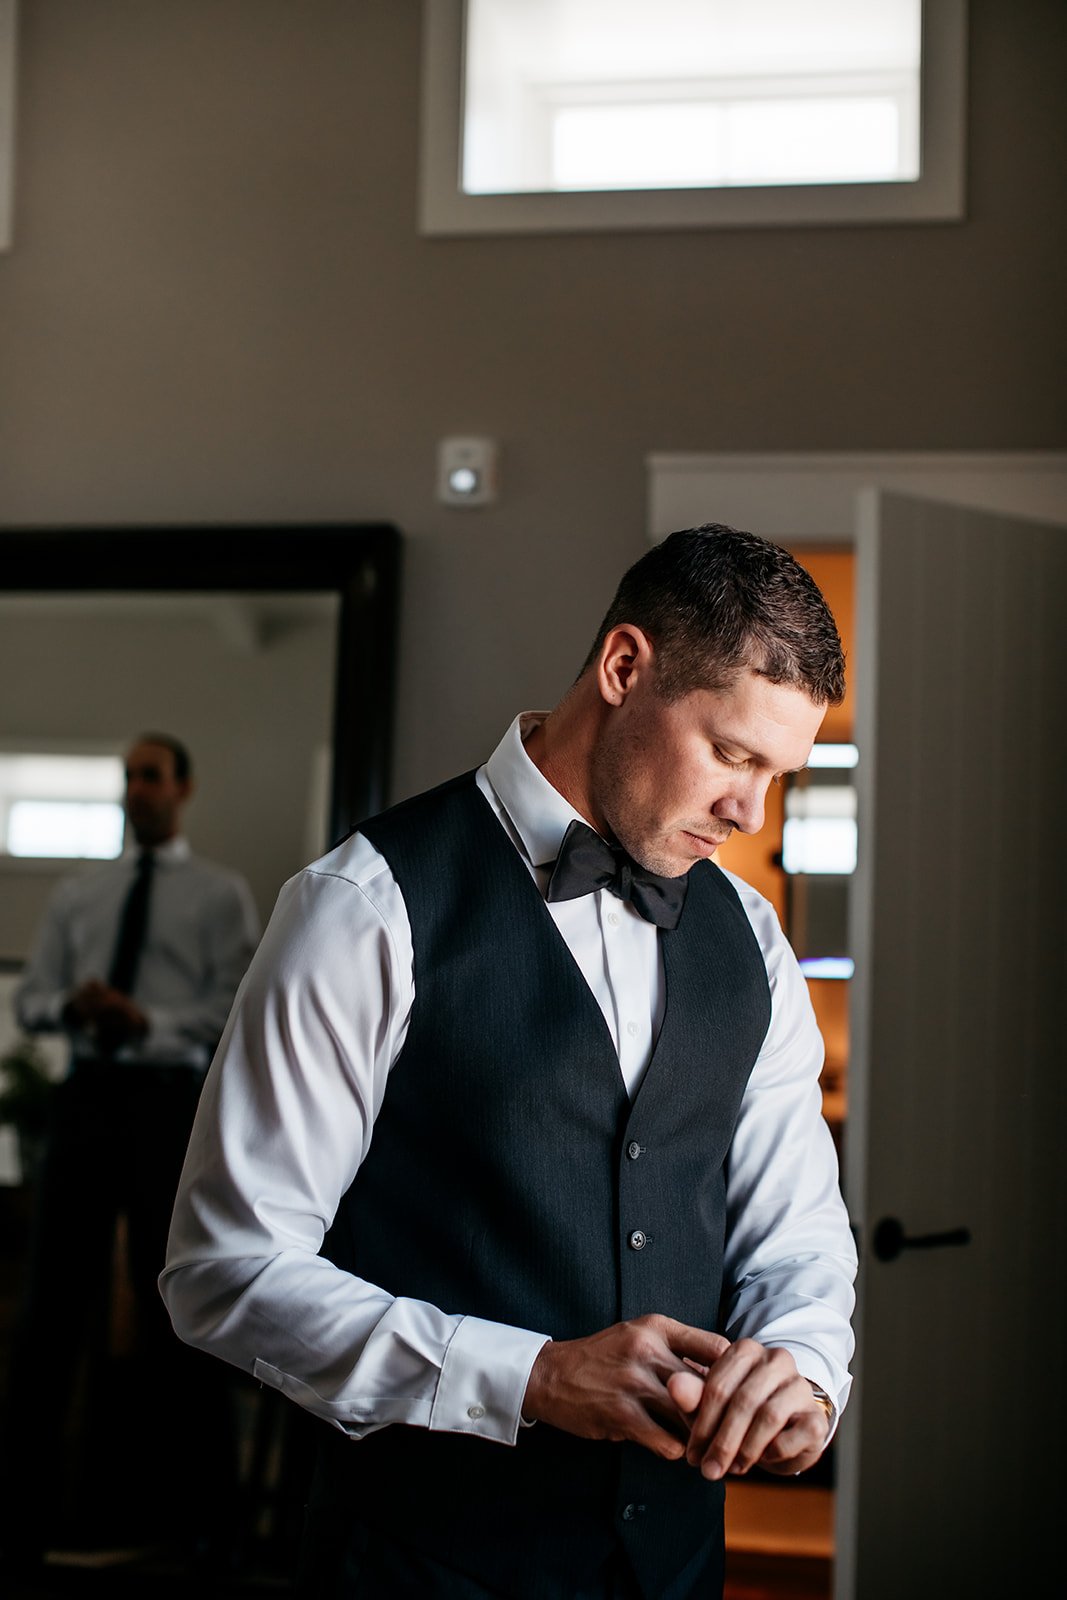  The groom getting ready for the couples’ big day in Manson, Washington. 